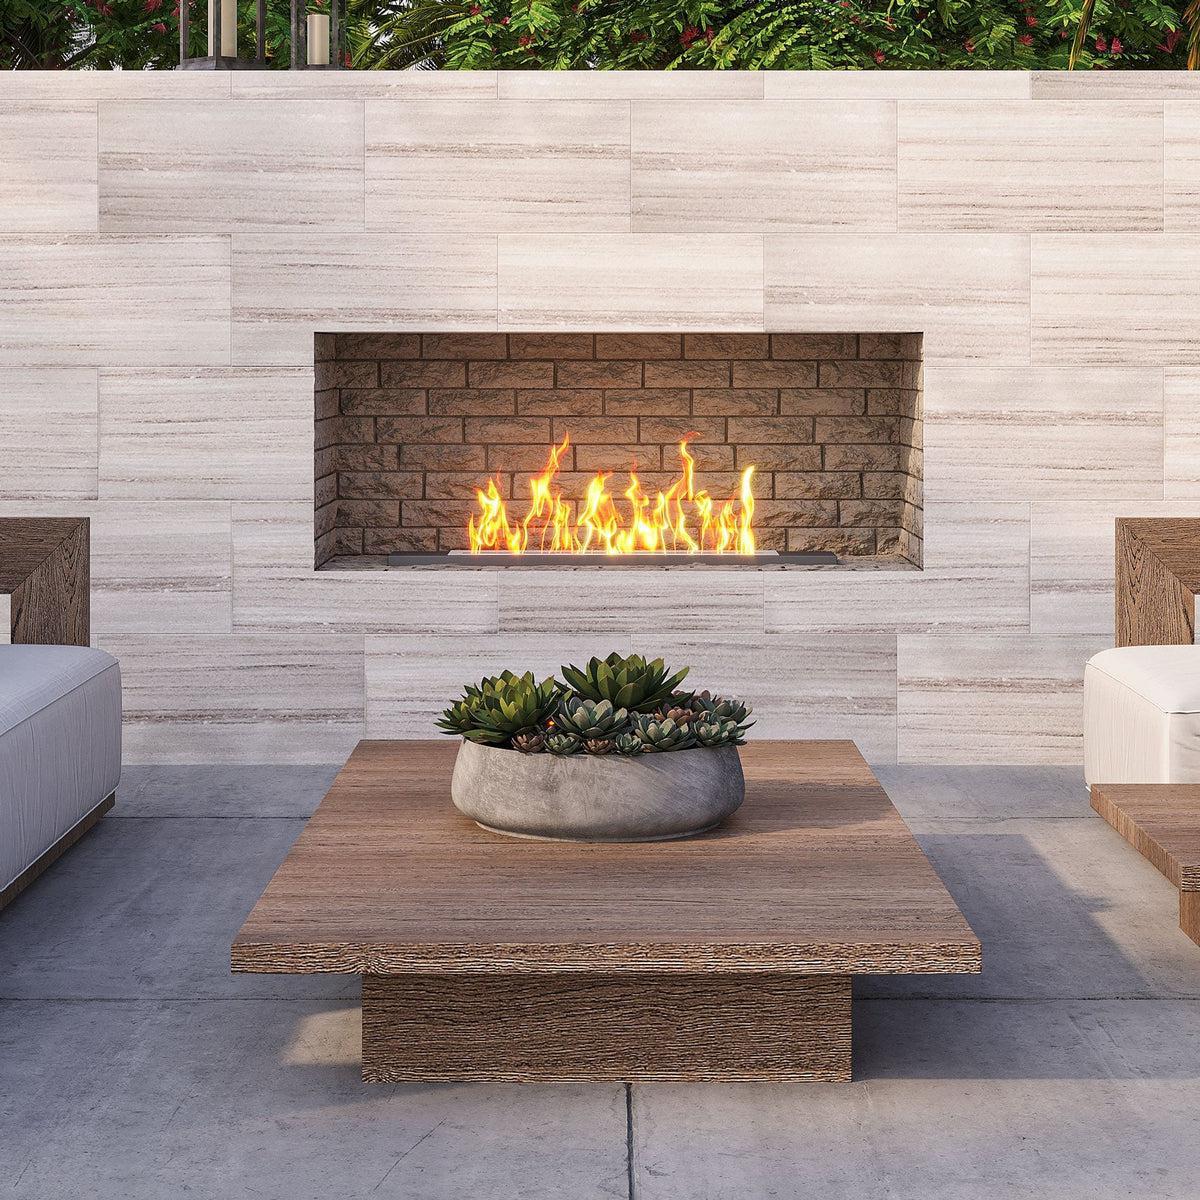 Modern outdoor fireplace surround tile